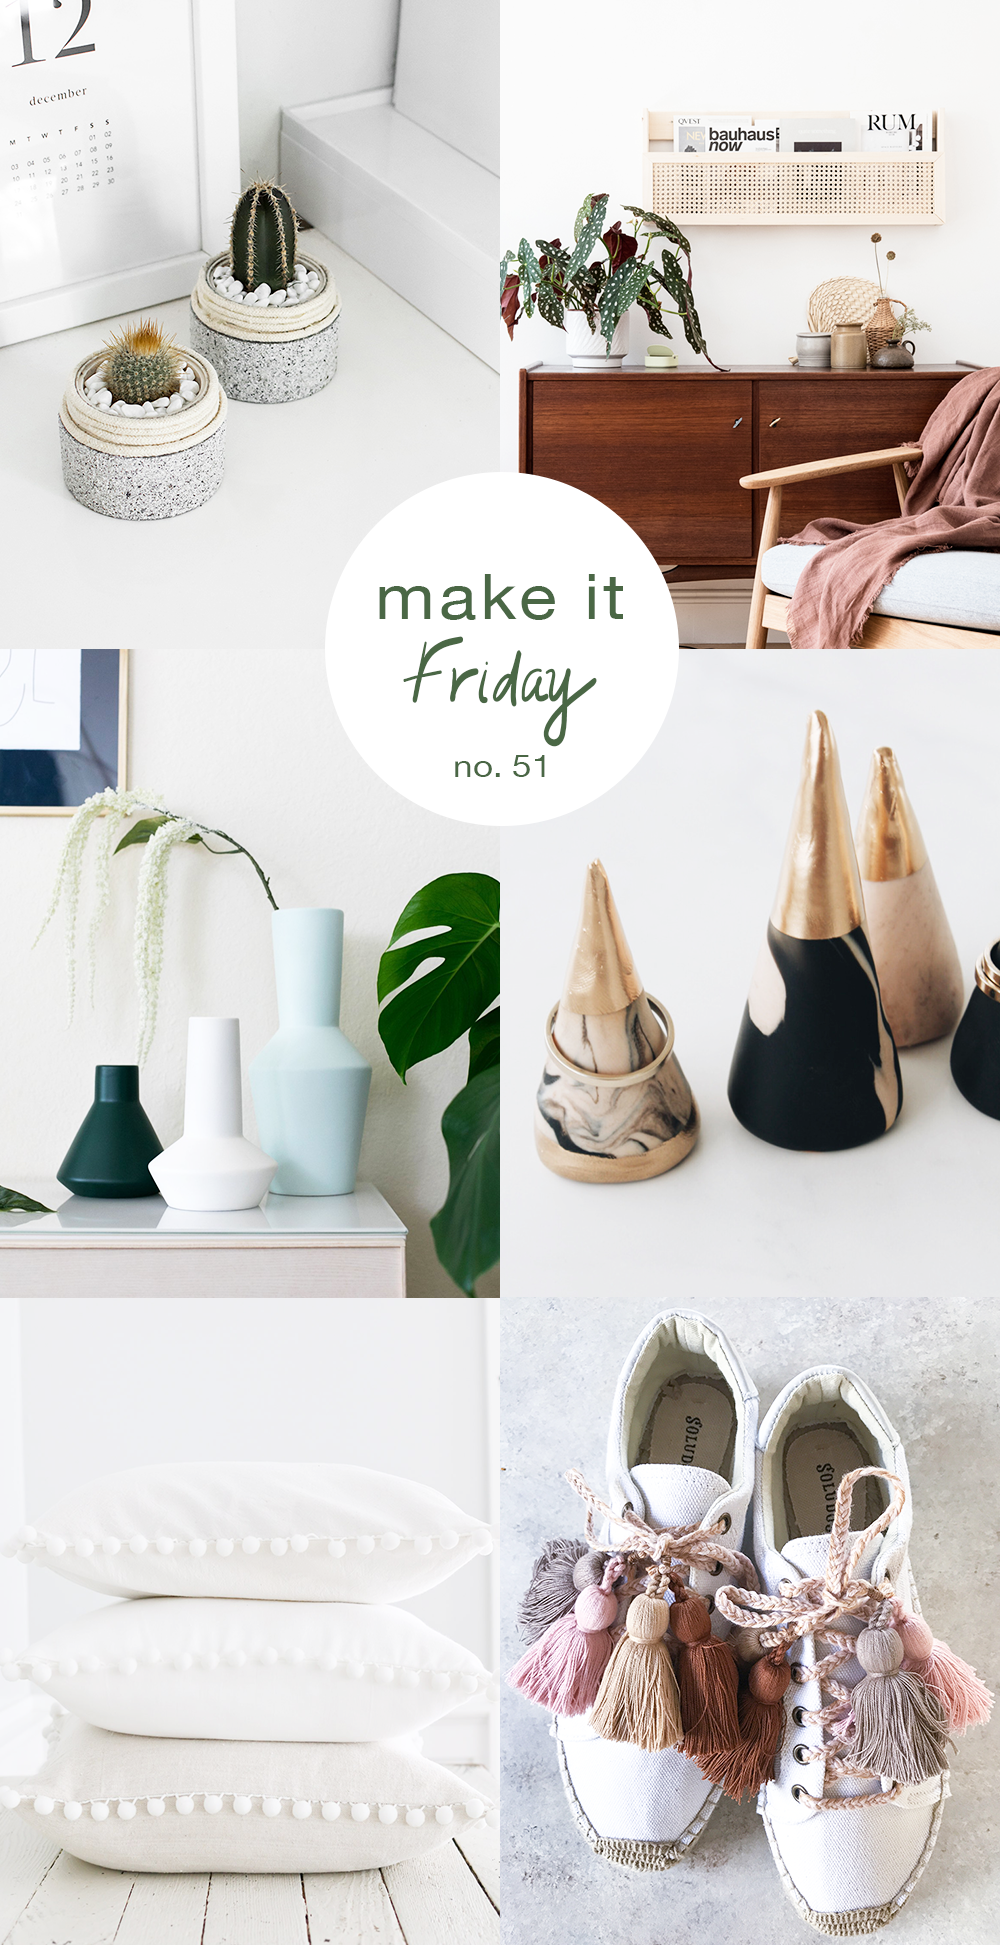 Make It Friday: Muted Spring Colors / DIY Inspiration from Idle Hands Awake